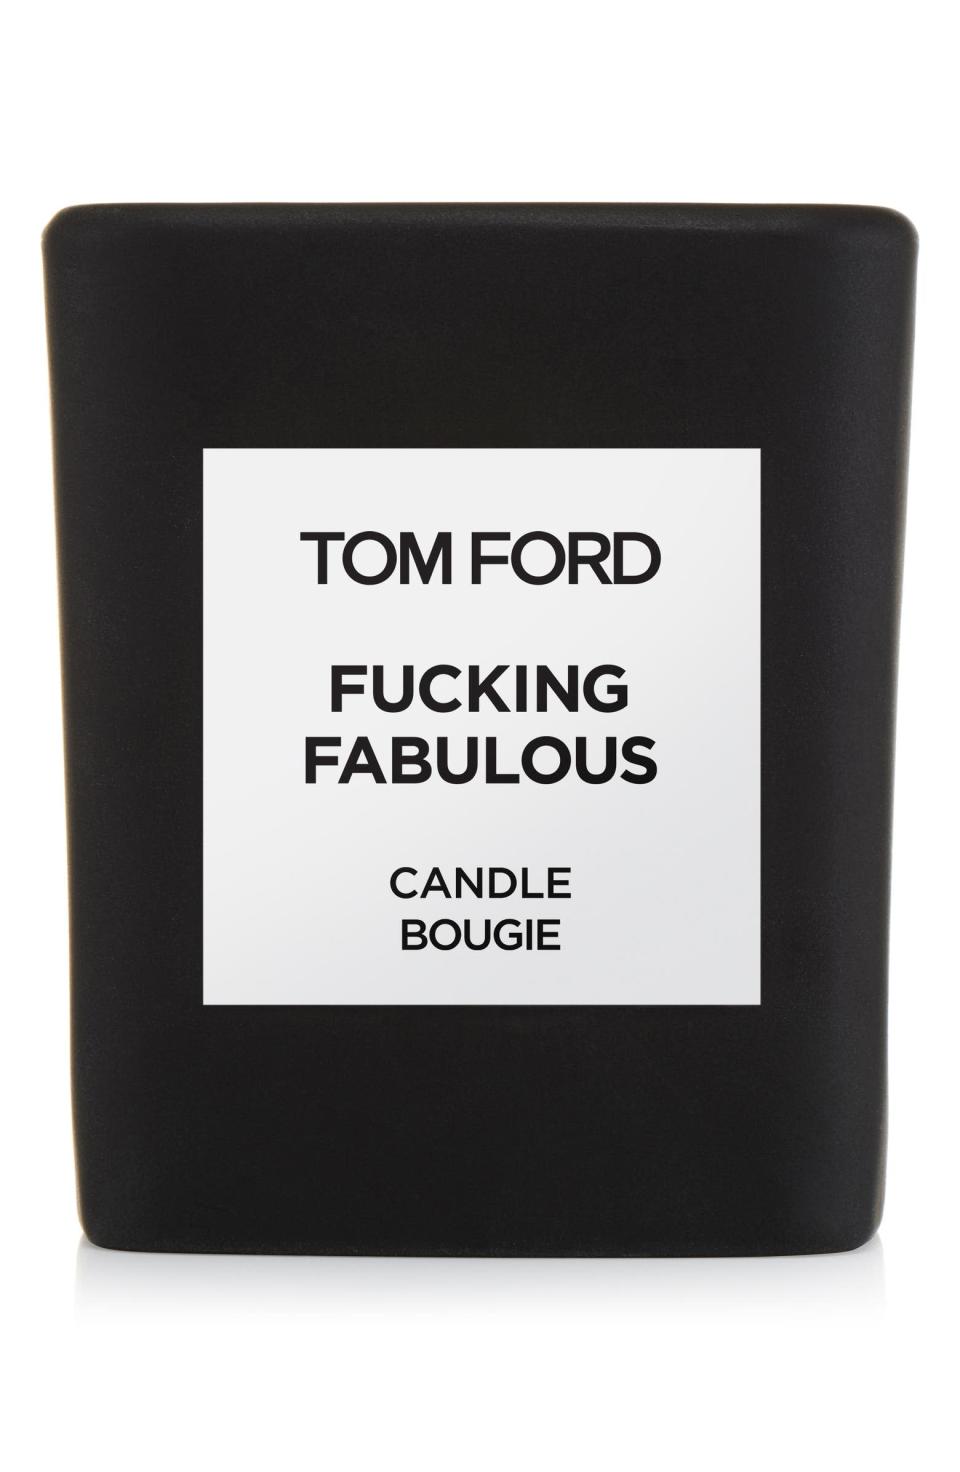 <h2>15% Off Tom Ford Fabulous Candle</h2><br>If your giftee is a fragrance snob — aka they already own every single perfume they could possibly want — then the answer to your gifting prayers is this, well, f*cking fabulous Tom Ford candle.<br><br><em>Shop <strong><a href="https://www.nordstrom.com/brands/tom-ford--5113/home/home-fragrance?breadcrumb=Home%2FBrands%2FTom%20Ford--5113%2FHome%2FHome%20Fragrance" rel="nofollow noopener" target="_blank" data-ylk="slk:Tom Ford Candles On Sale" class="link ">Tom Ford Candles On Sale</a></strong></em><br><br><strong>Tom Ford</strong> Fabulous Candle, $, available at <a href="https://go.skimresources.com/?id=30283X879131&url=https%3A%2F%2Fwww.nordstrom.com%2Fs%2Ftom-ford-fabulous-candle%2F5084903" rel="nofollow noopener" target="_blank" data-ylk="slk:Nordstrom" class="link ">Nordstrom</a>